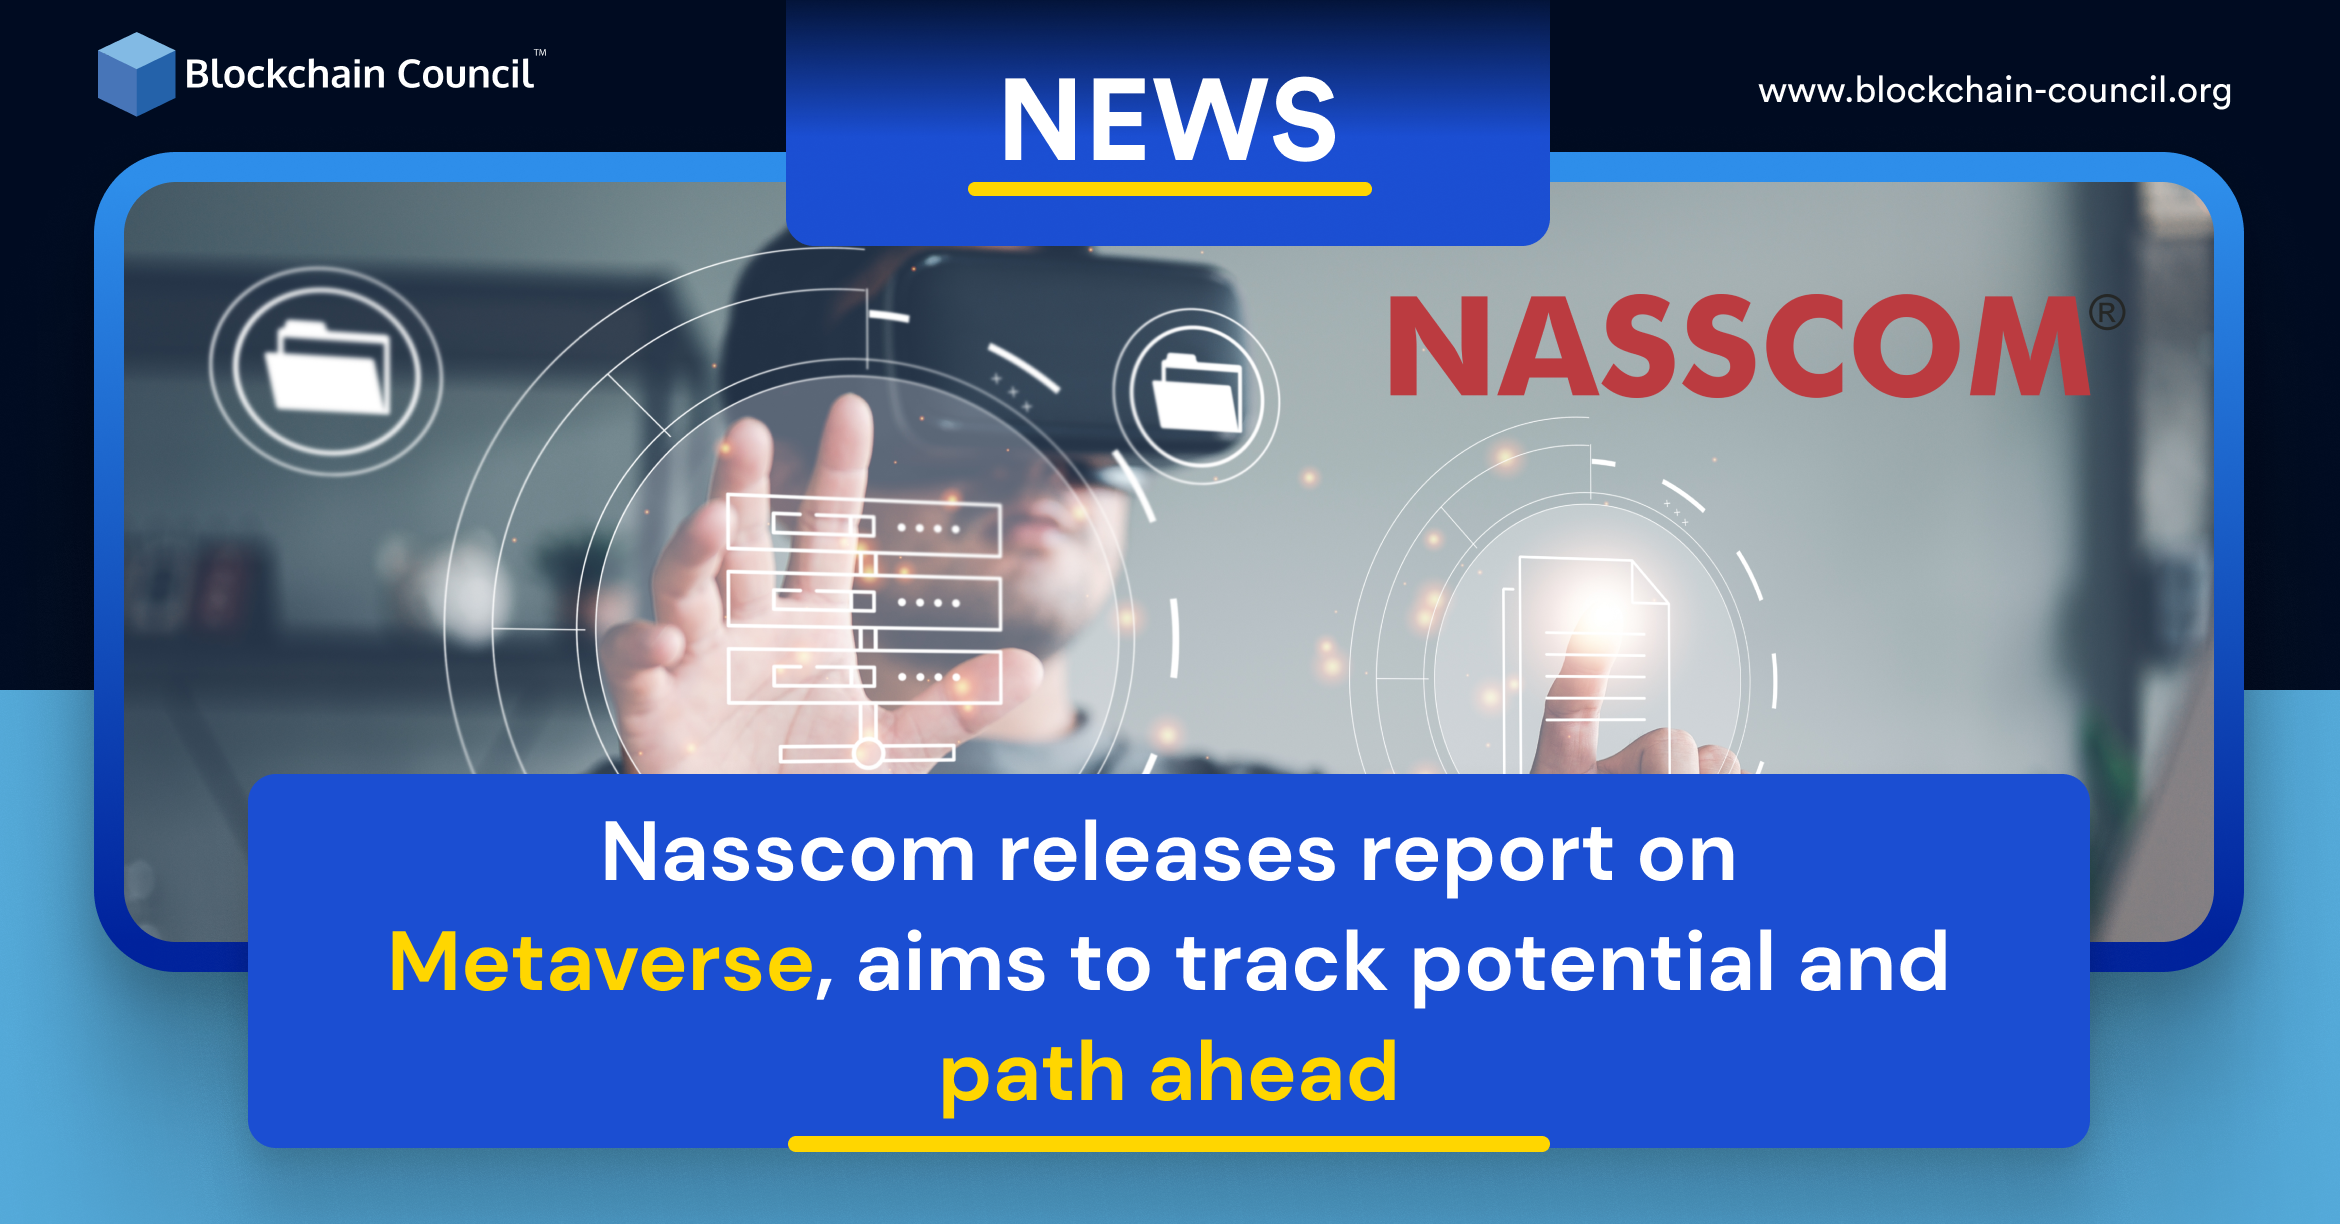 Nasscom Releases Report on Metaverse, Aims to Track Potential and Path Ahead